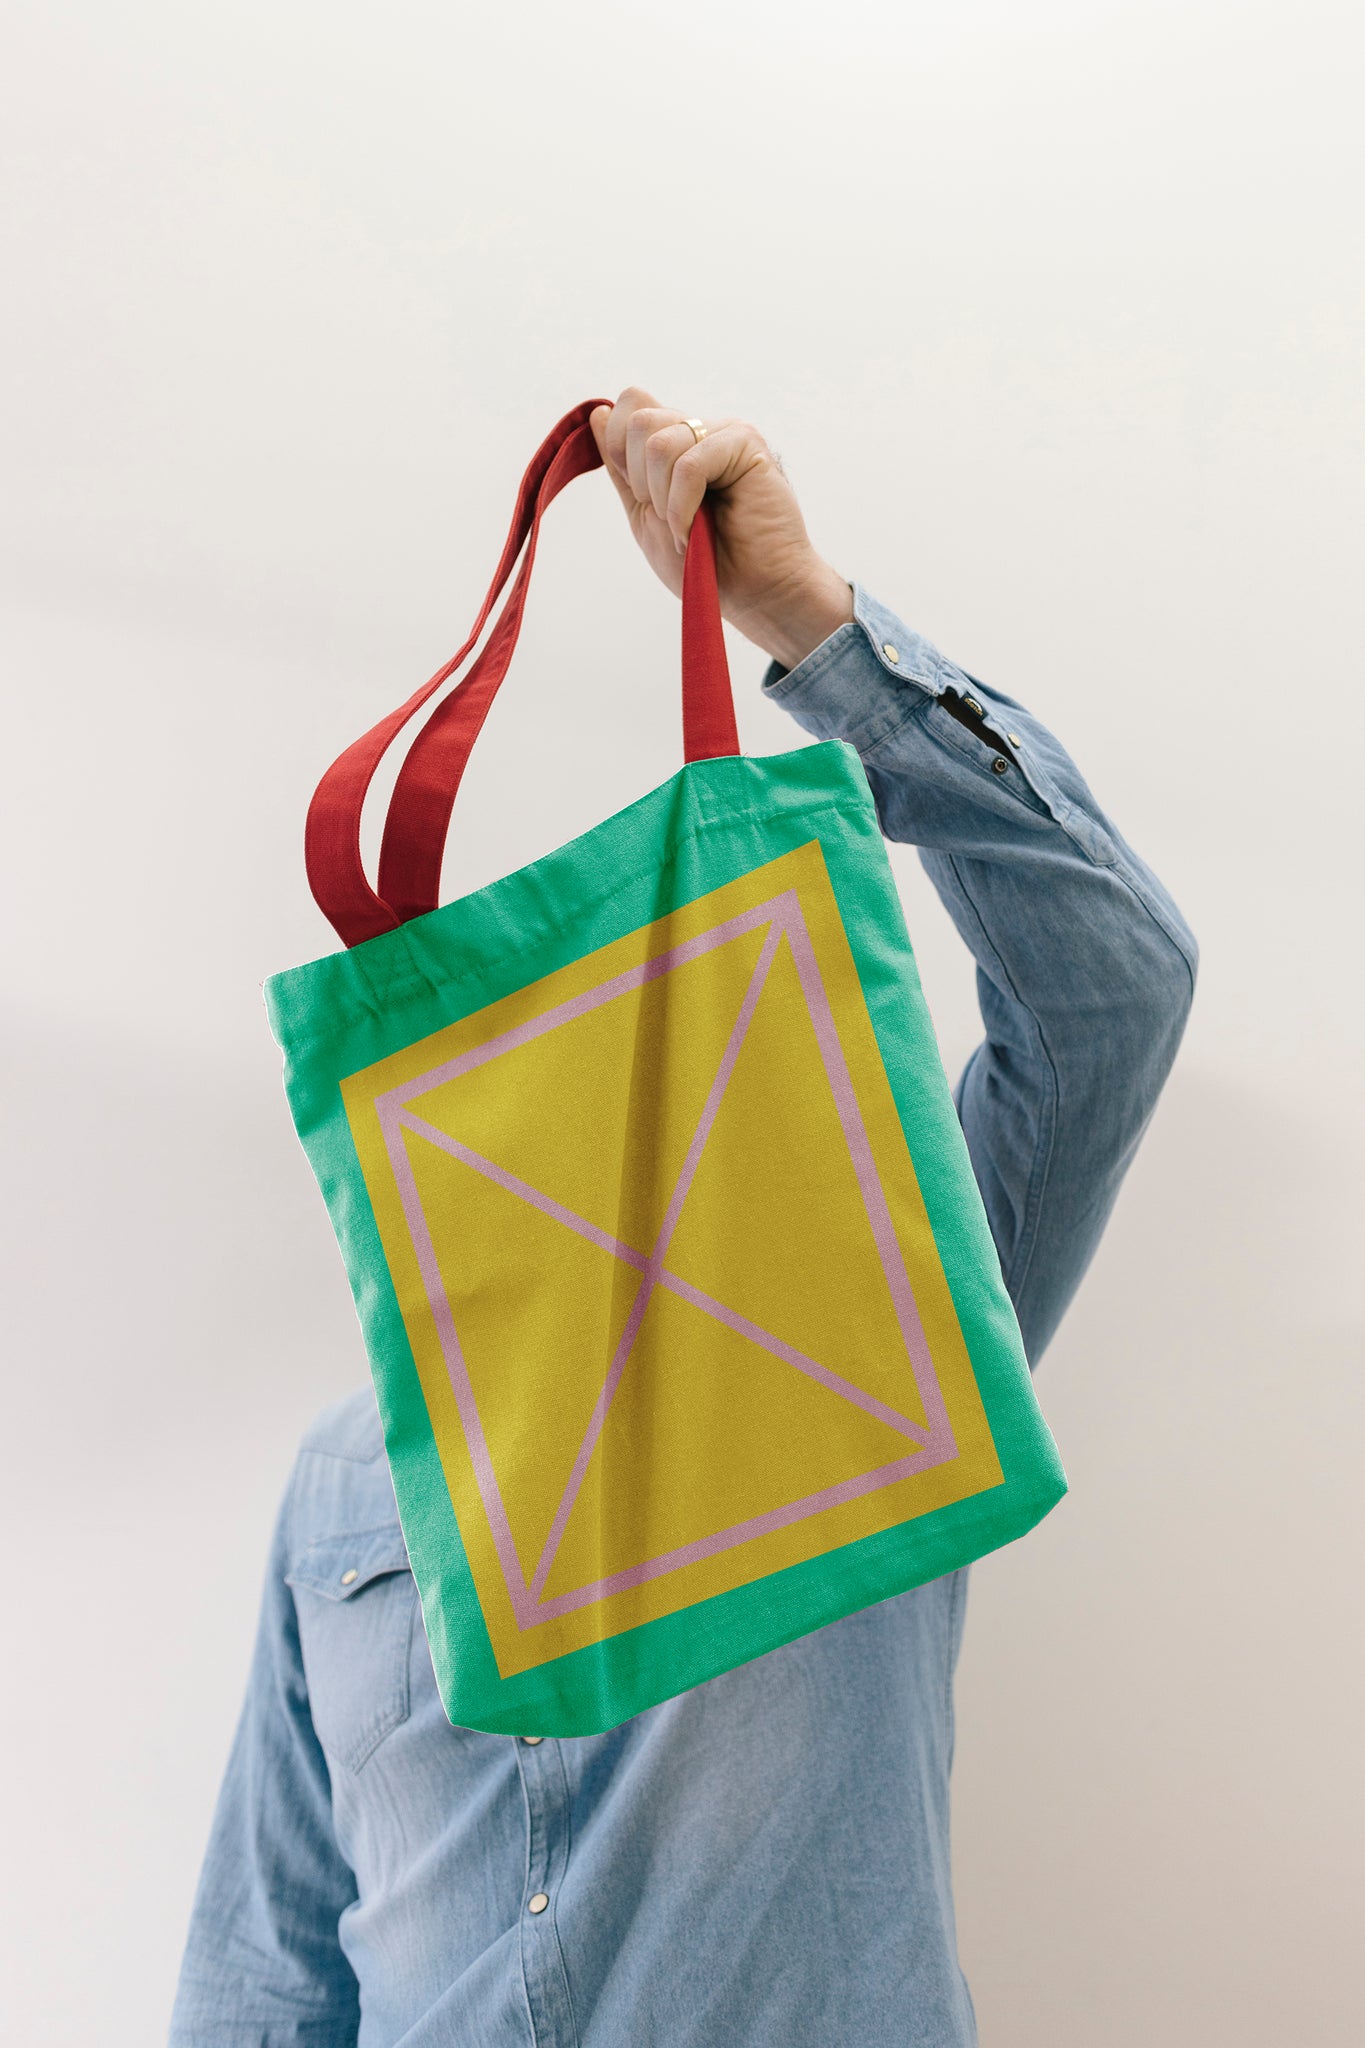 Person holding a green tote bag by its red handles positioned over their head, covering themselves. Bag has a large yellow box in the middle of the bag, with the pink X grid line in the middle. Person is standing against a plain grey wall wearing a long sleeve denim shirt. 